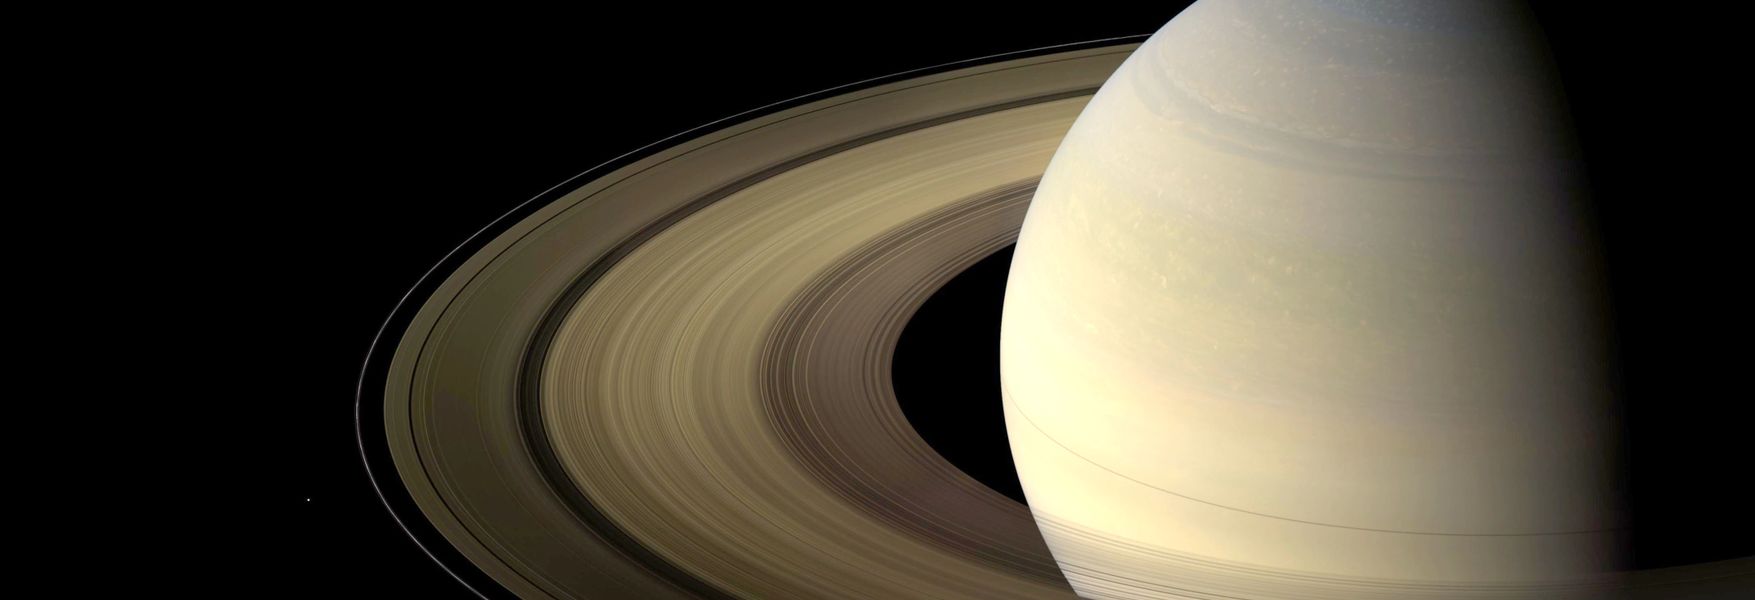 Why is Saturn So Special?: Discovering the Wonders of the Ringed Planet —  GripRoom